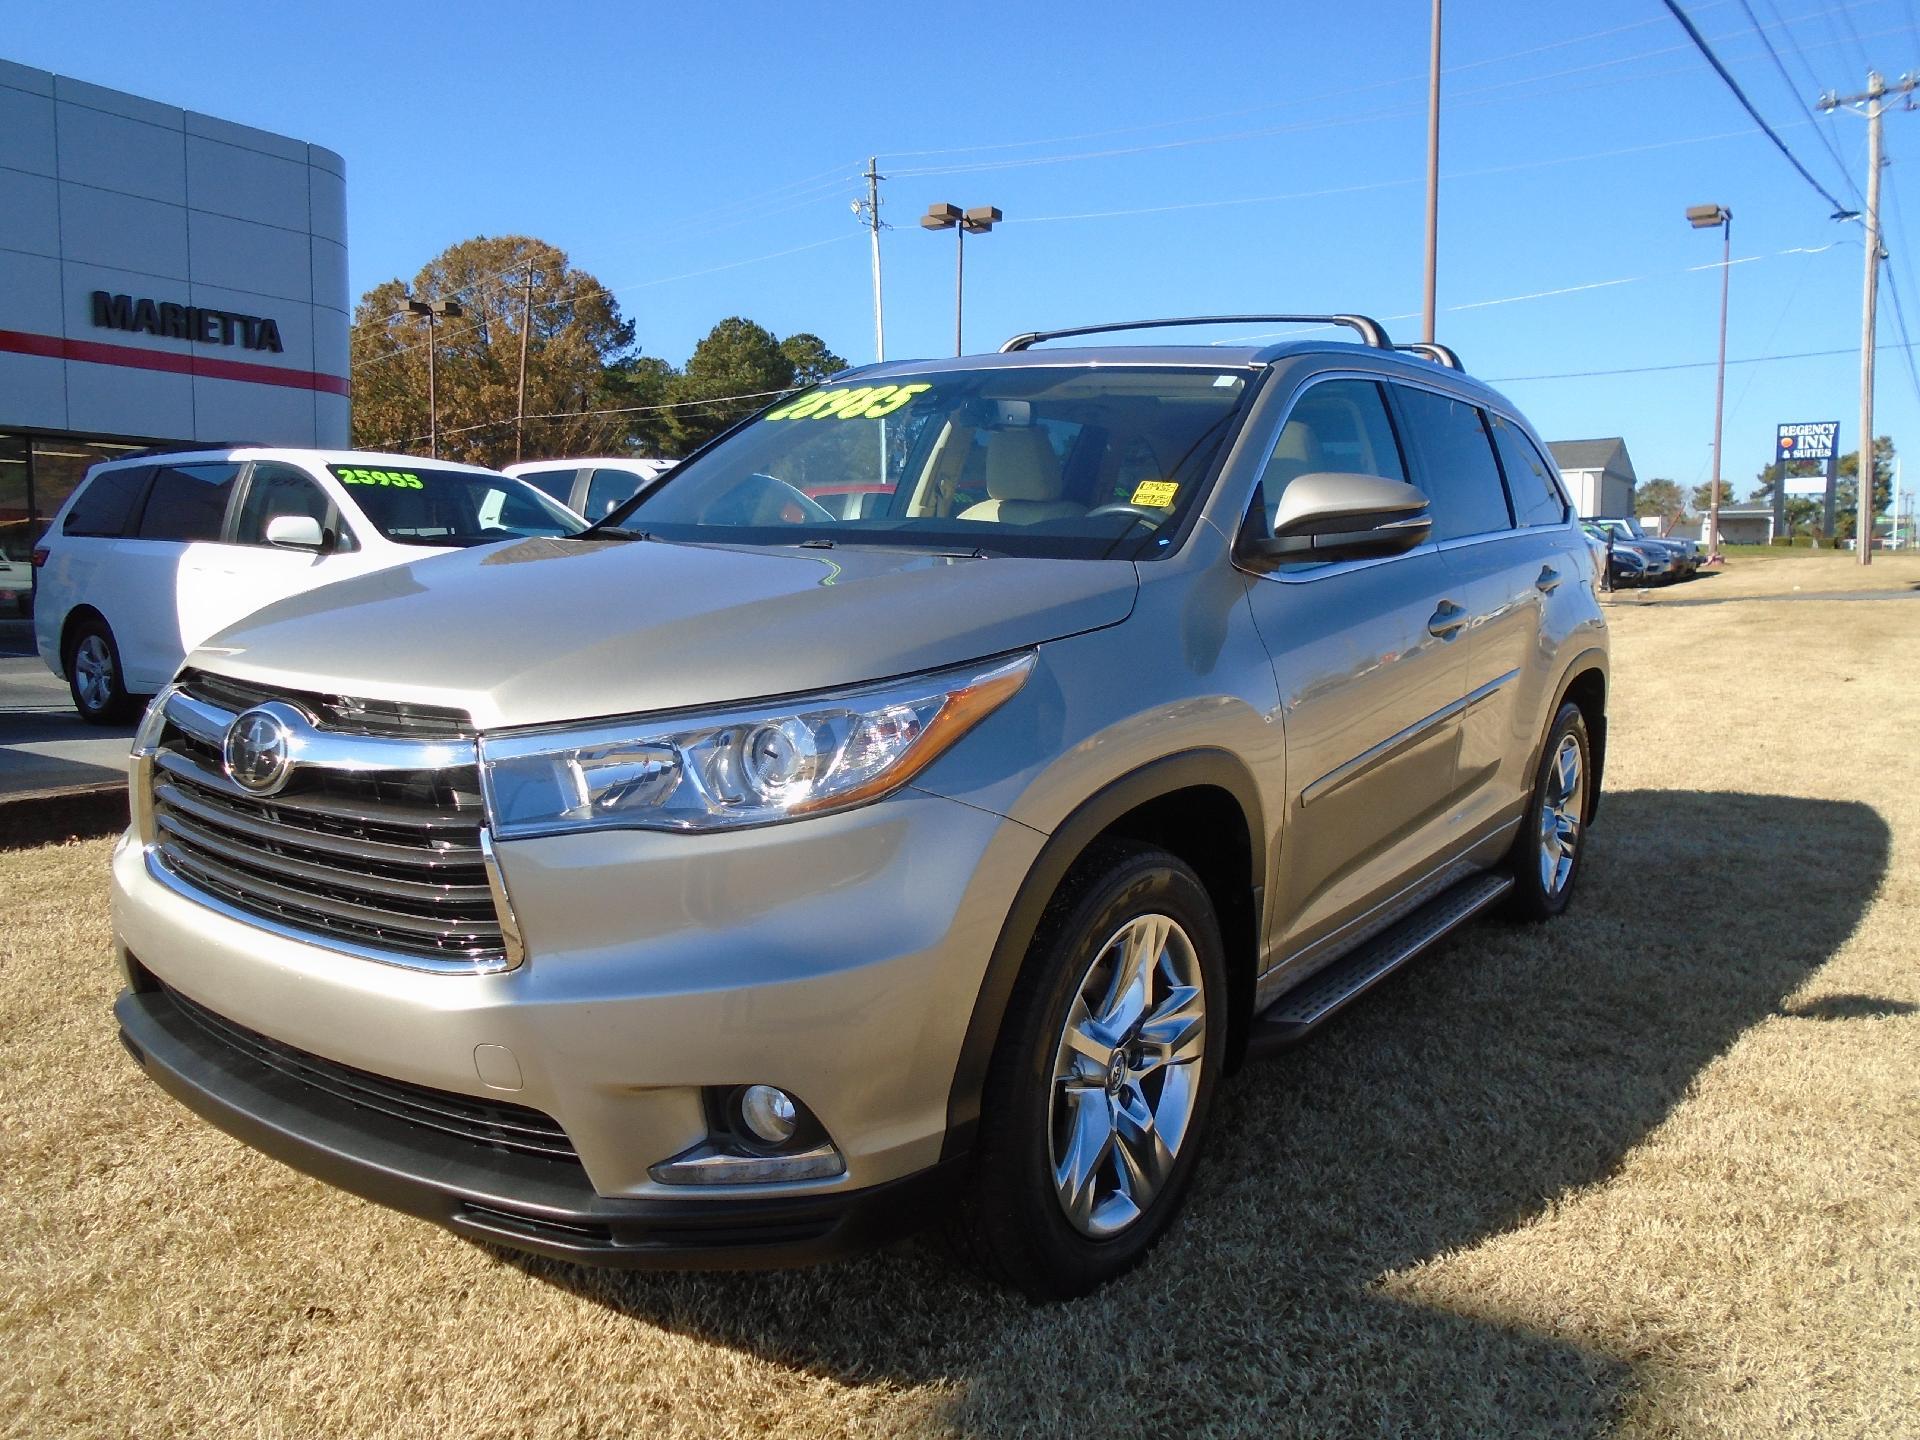 PreOwned 2015 Toyota Highlander Limited Platinum AWD in